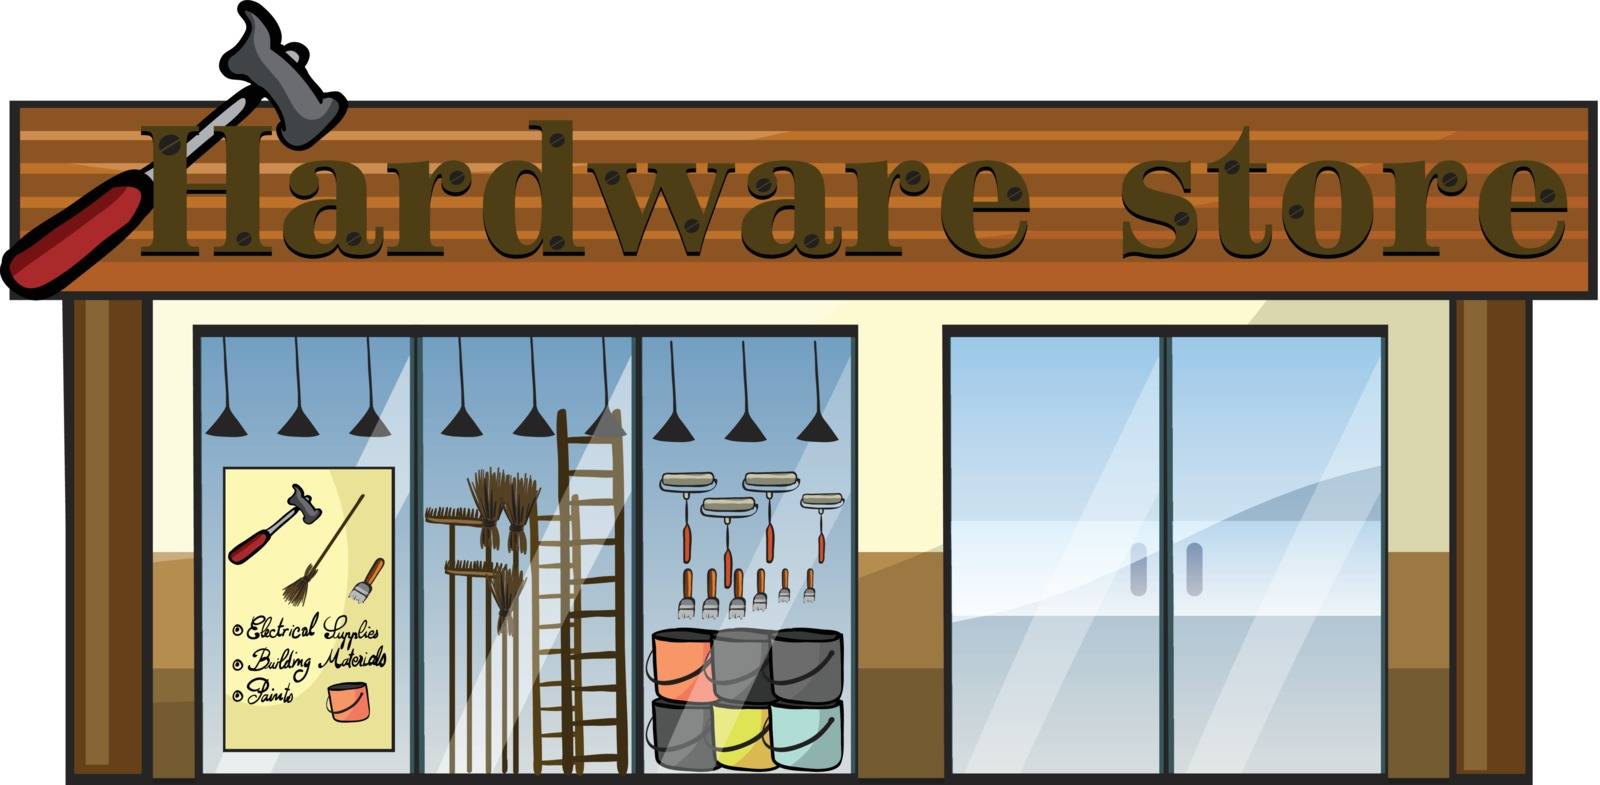 Illustration of a hardware store on a white background